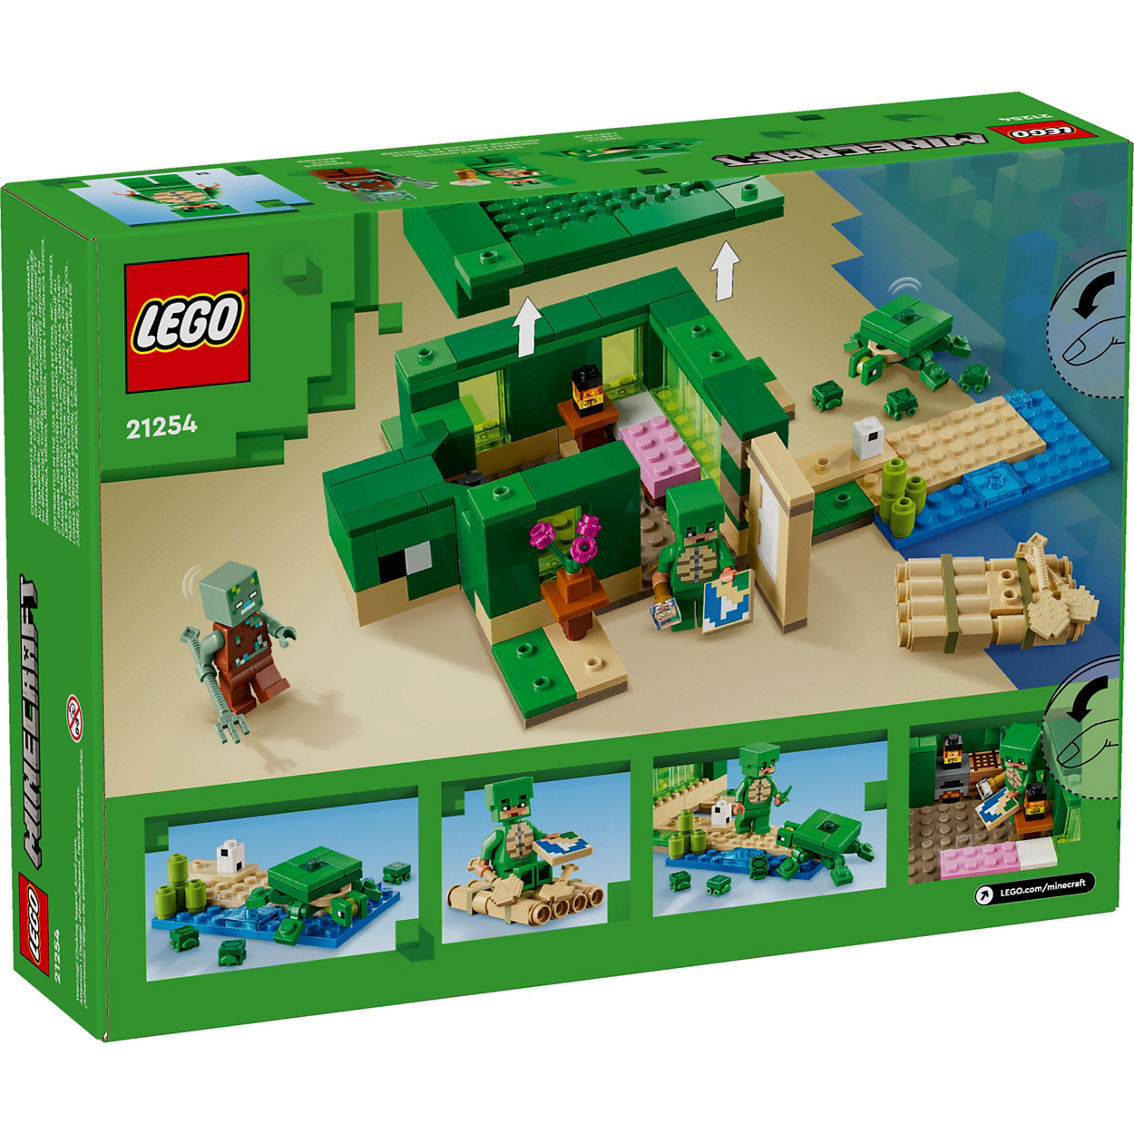 LEGO Minecraft The Turtle Beach House 21254 - Image 2 of 10